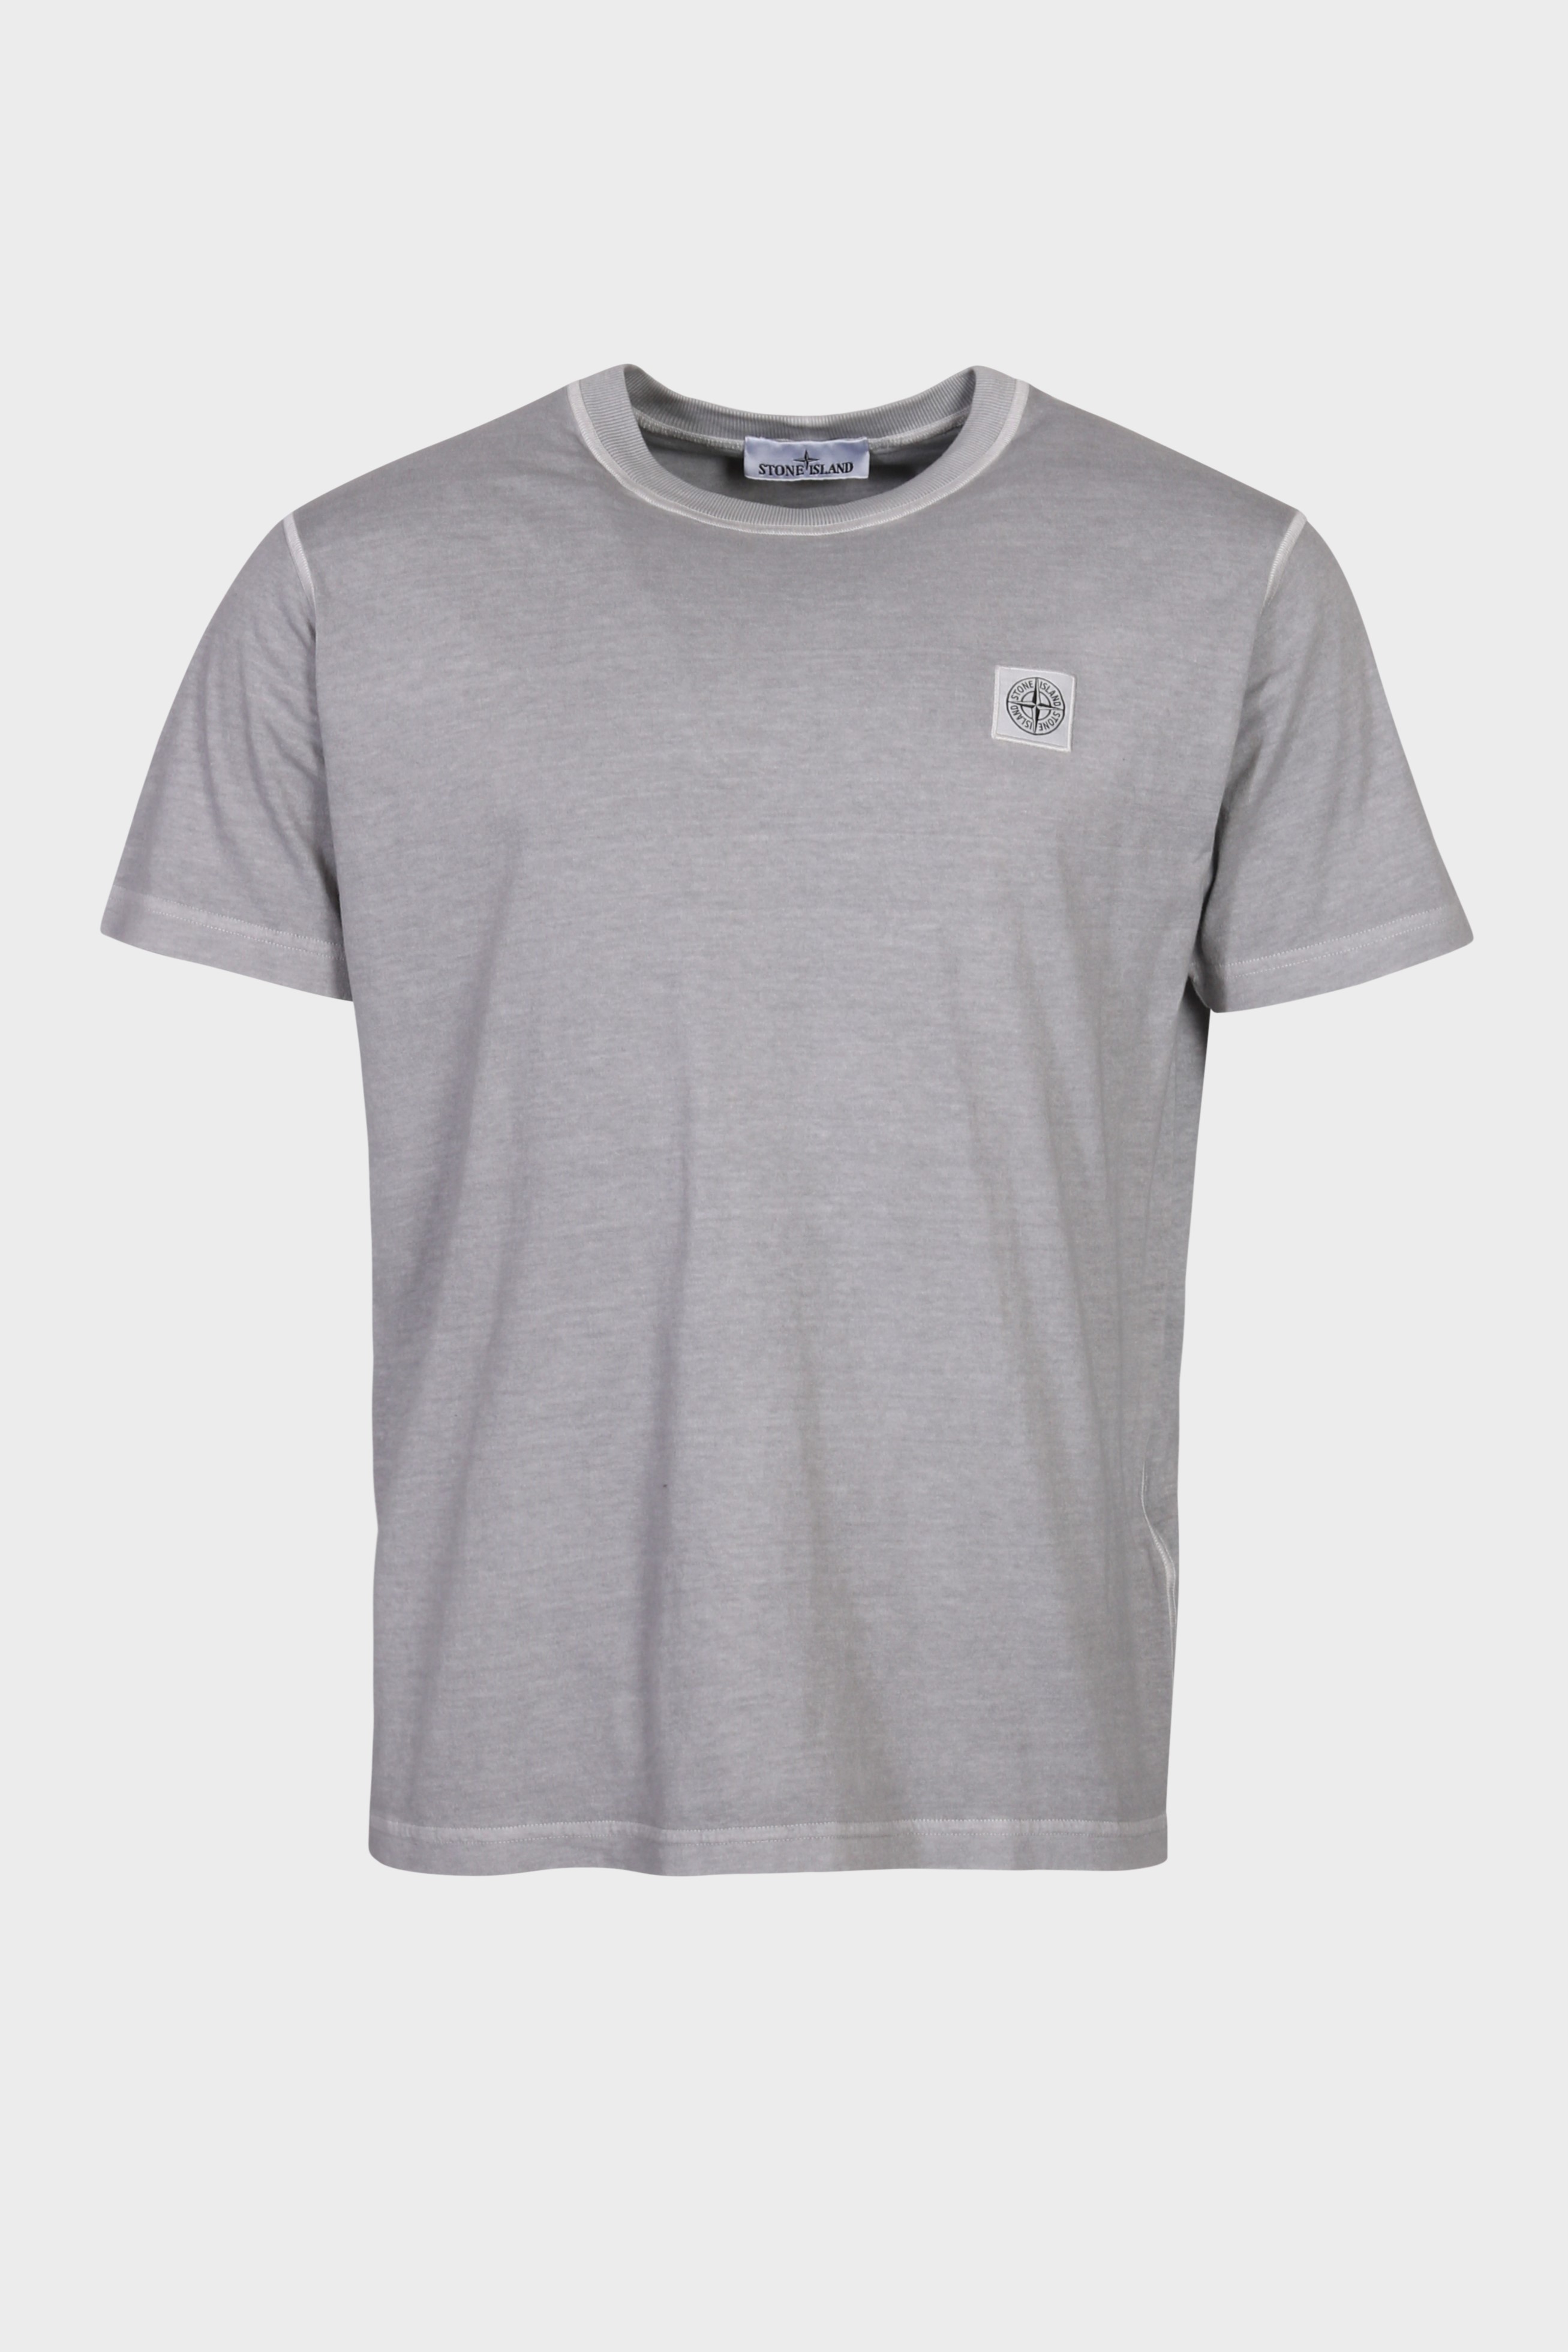 STONE ISLAND T-Shirt in Washed Grey M